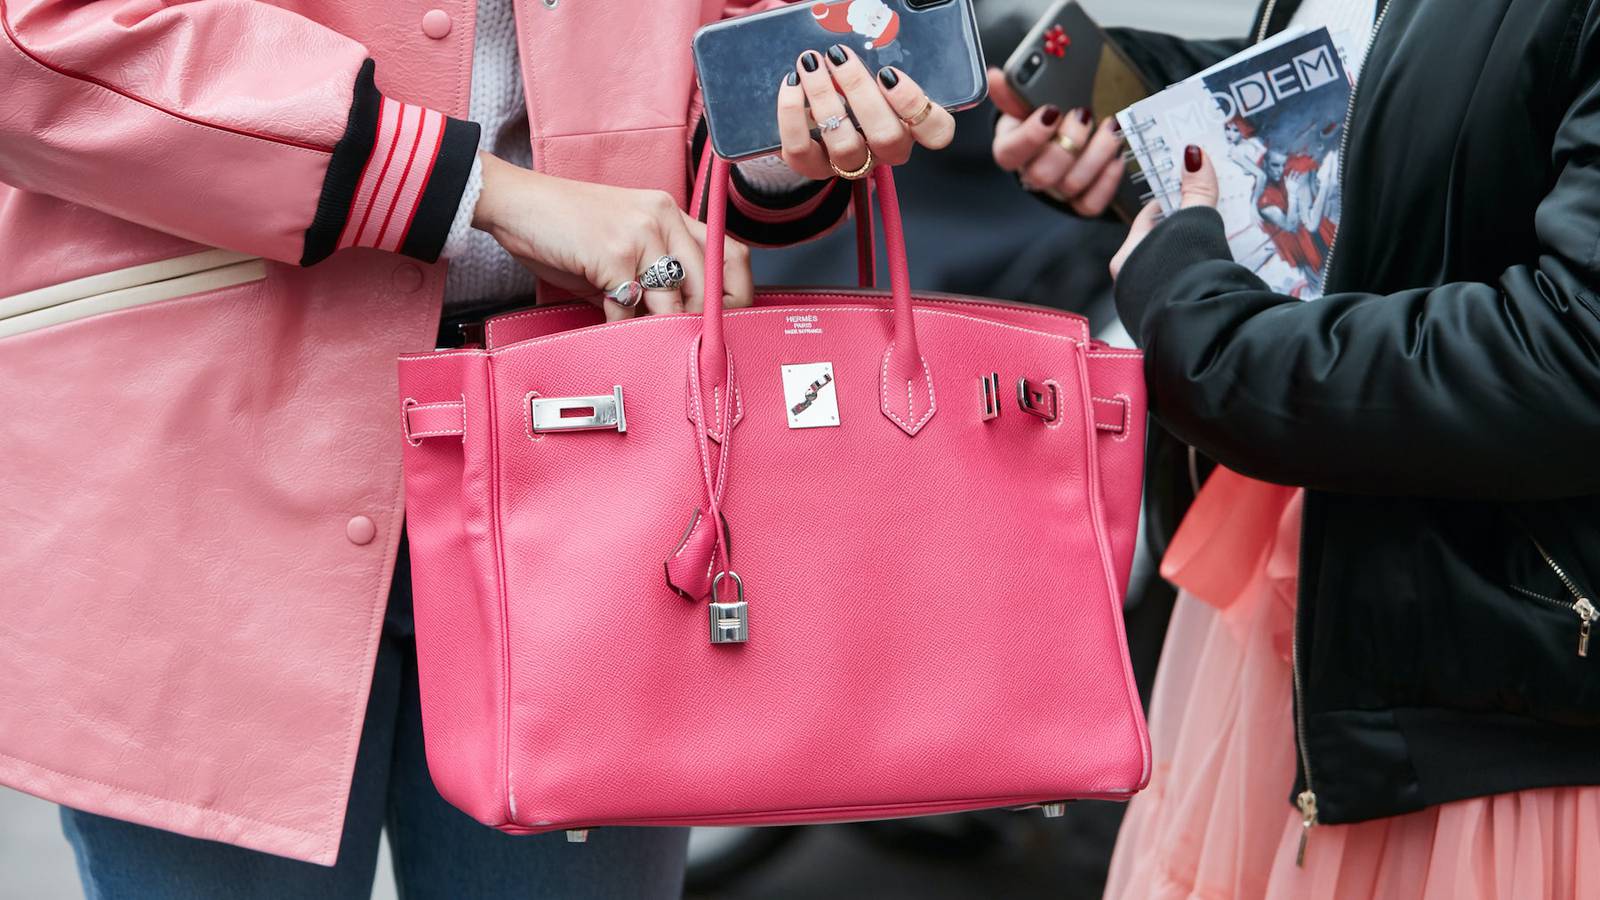 Hermes Sales Jump on Leather Handbags, Ready-to-Wear Clothes